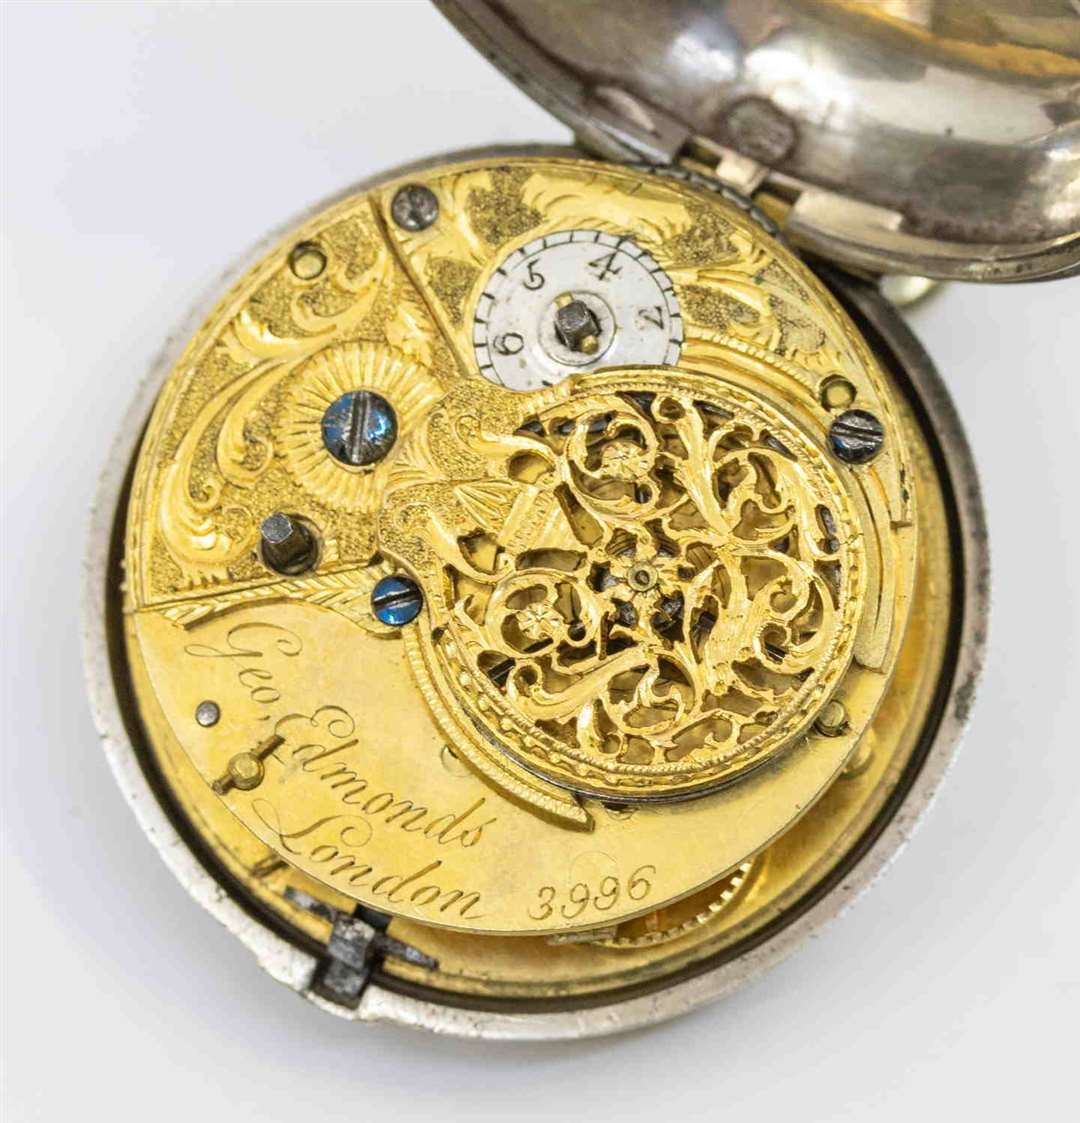 The watch was hallmarked for London in 1788 and adorned with a chain and fob seal (Hansons Auctioneers/PA)